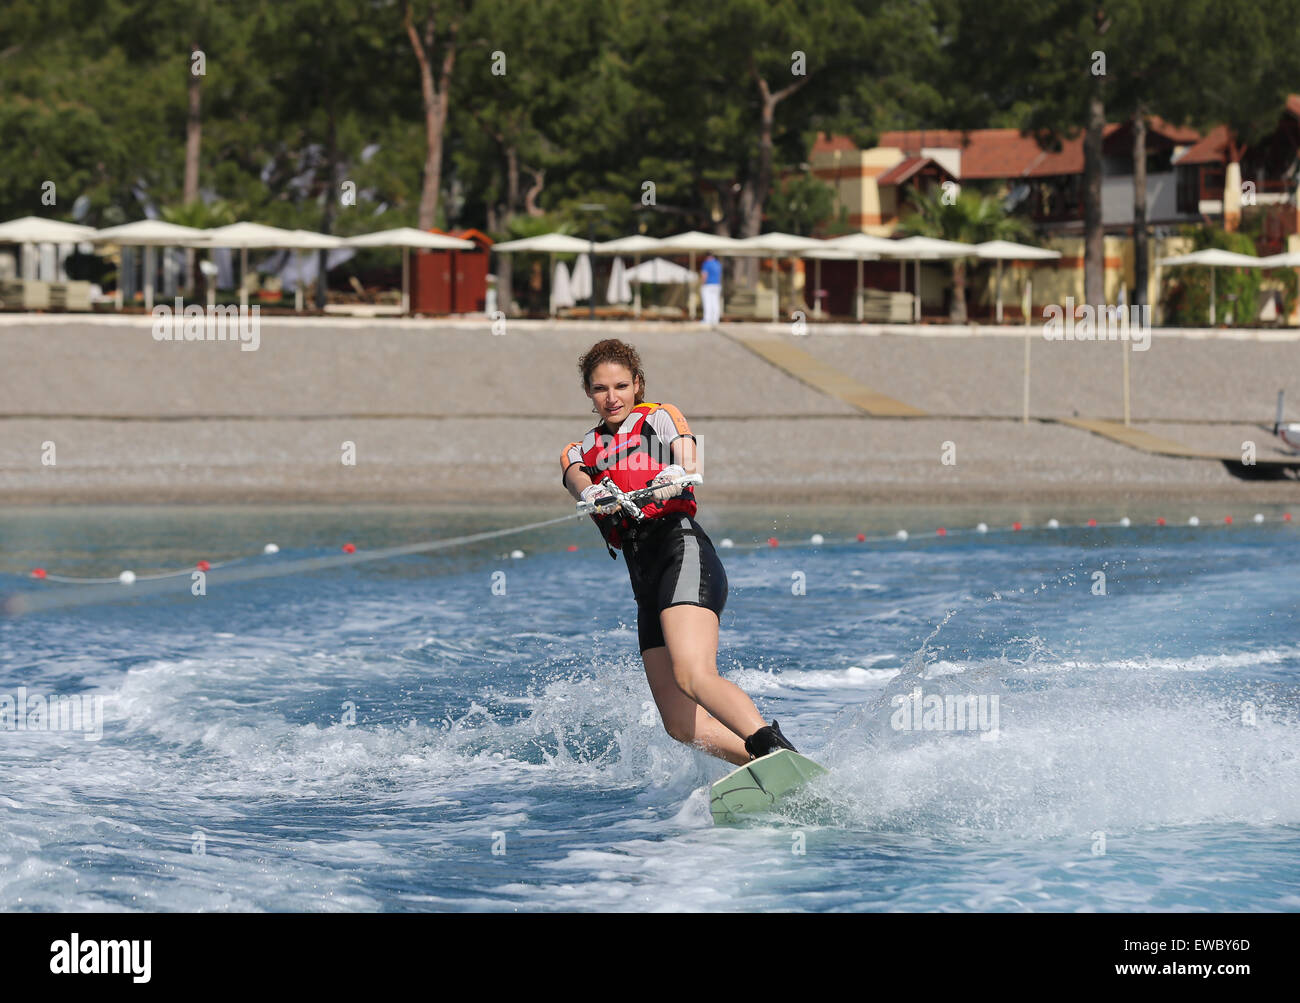 Young woman on waterski Stock Photo